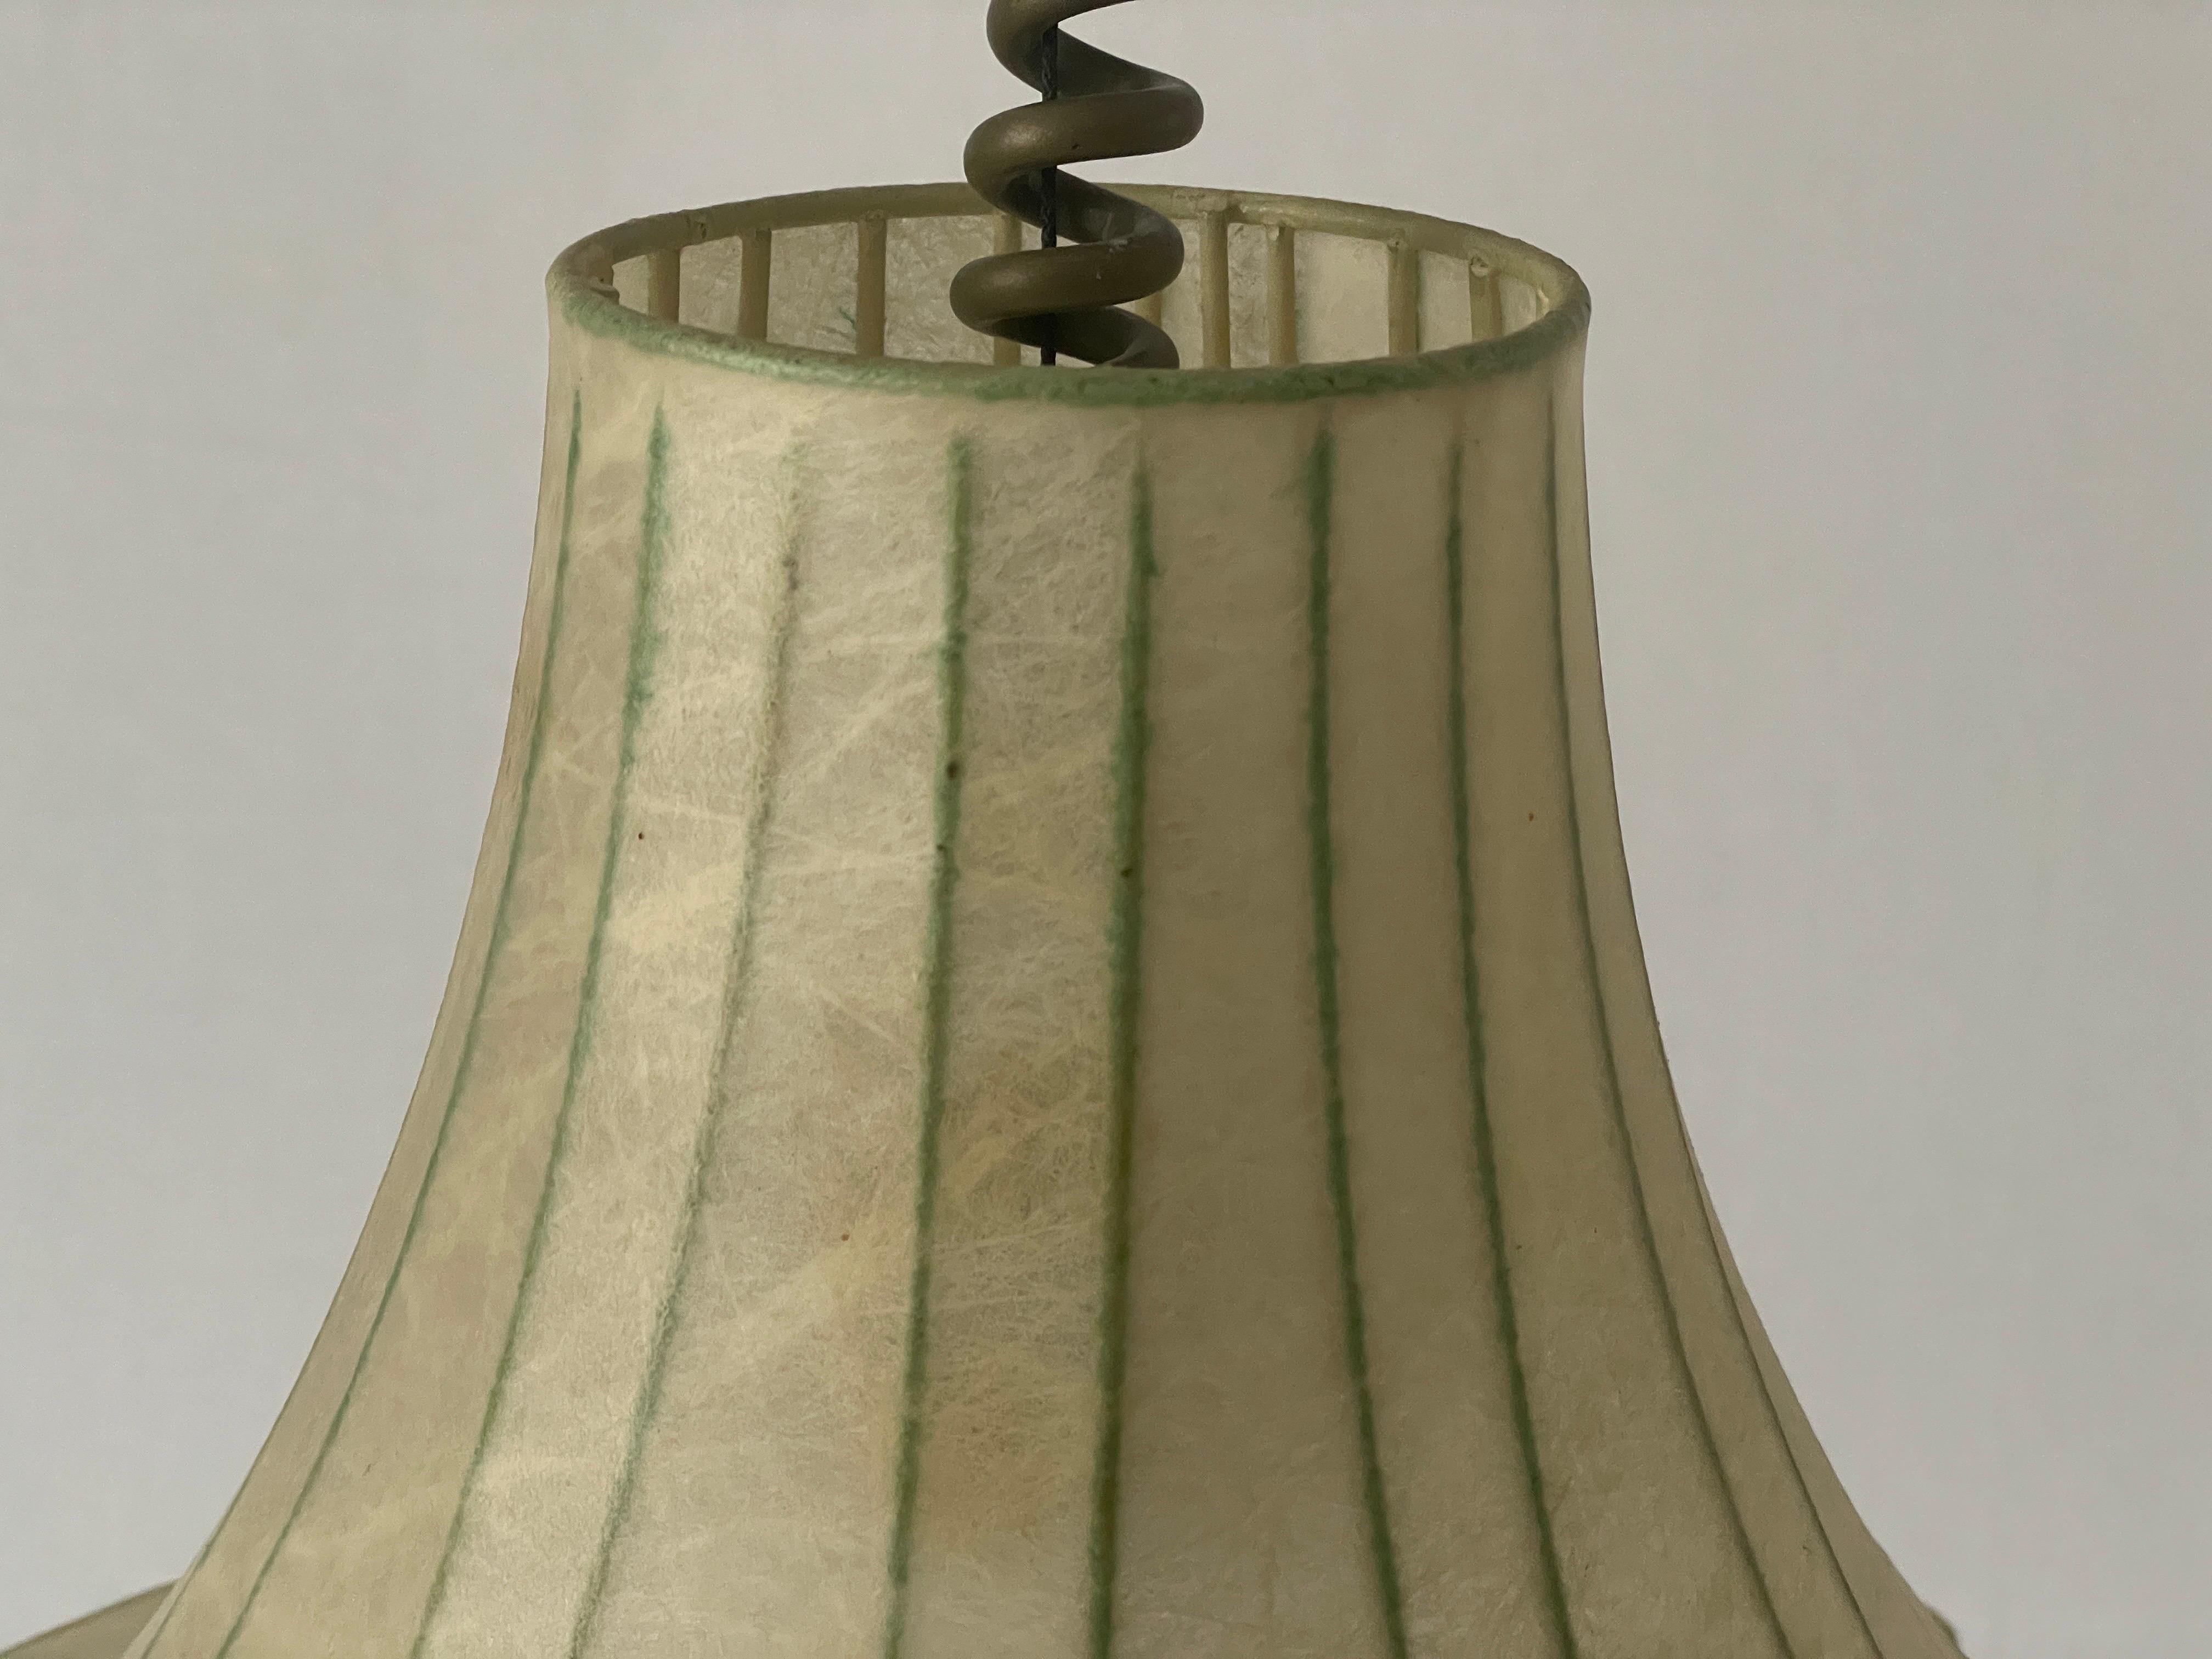 Tulip Design Cocoon Adjustable Height Pendant Lamp by Goldkant, 1960s, Germany For Sale 1